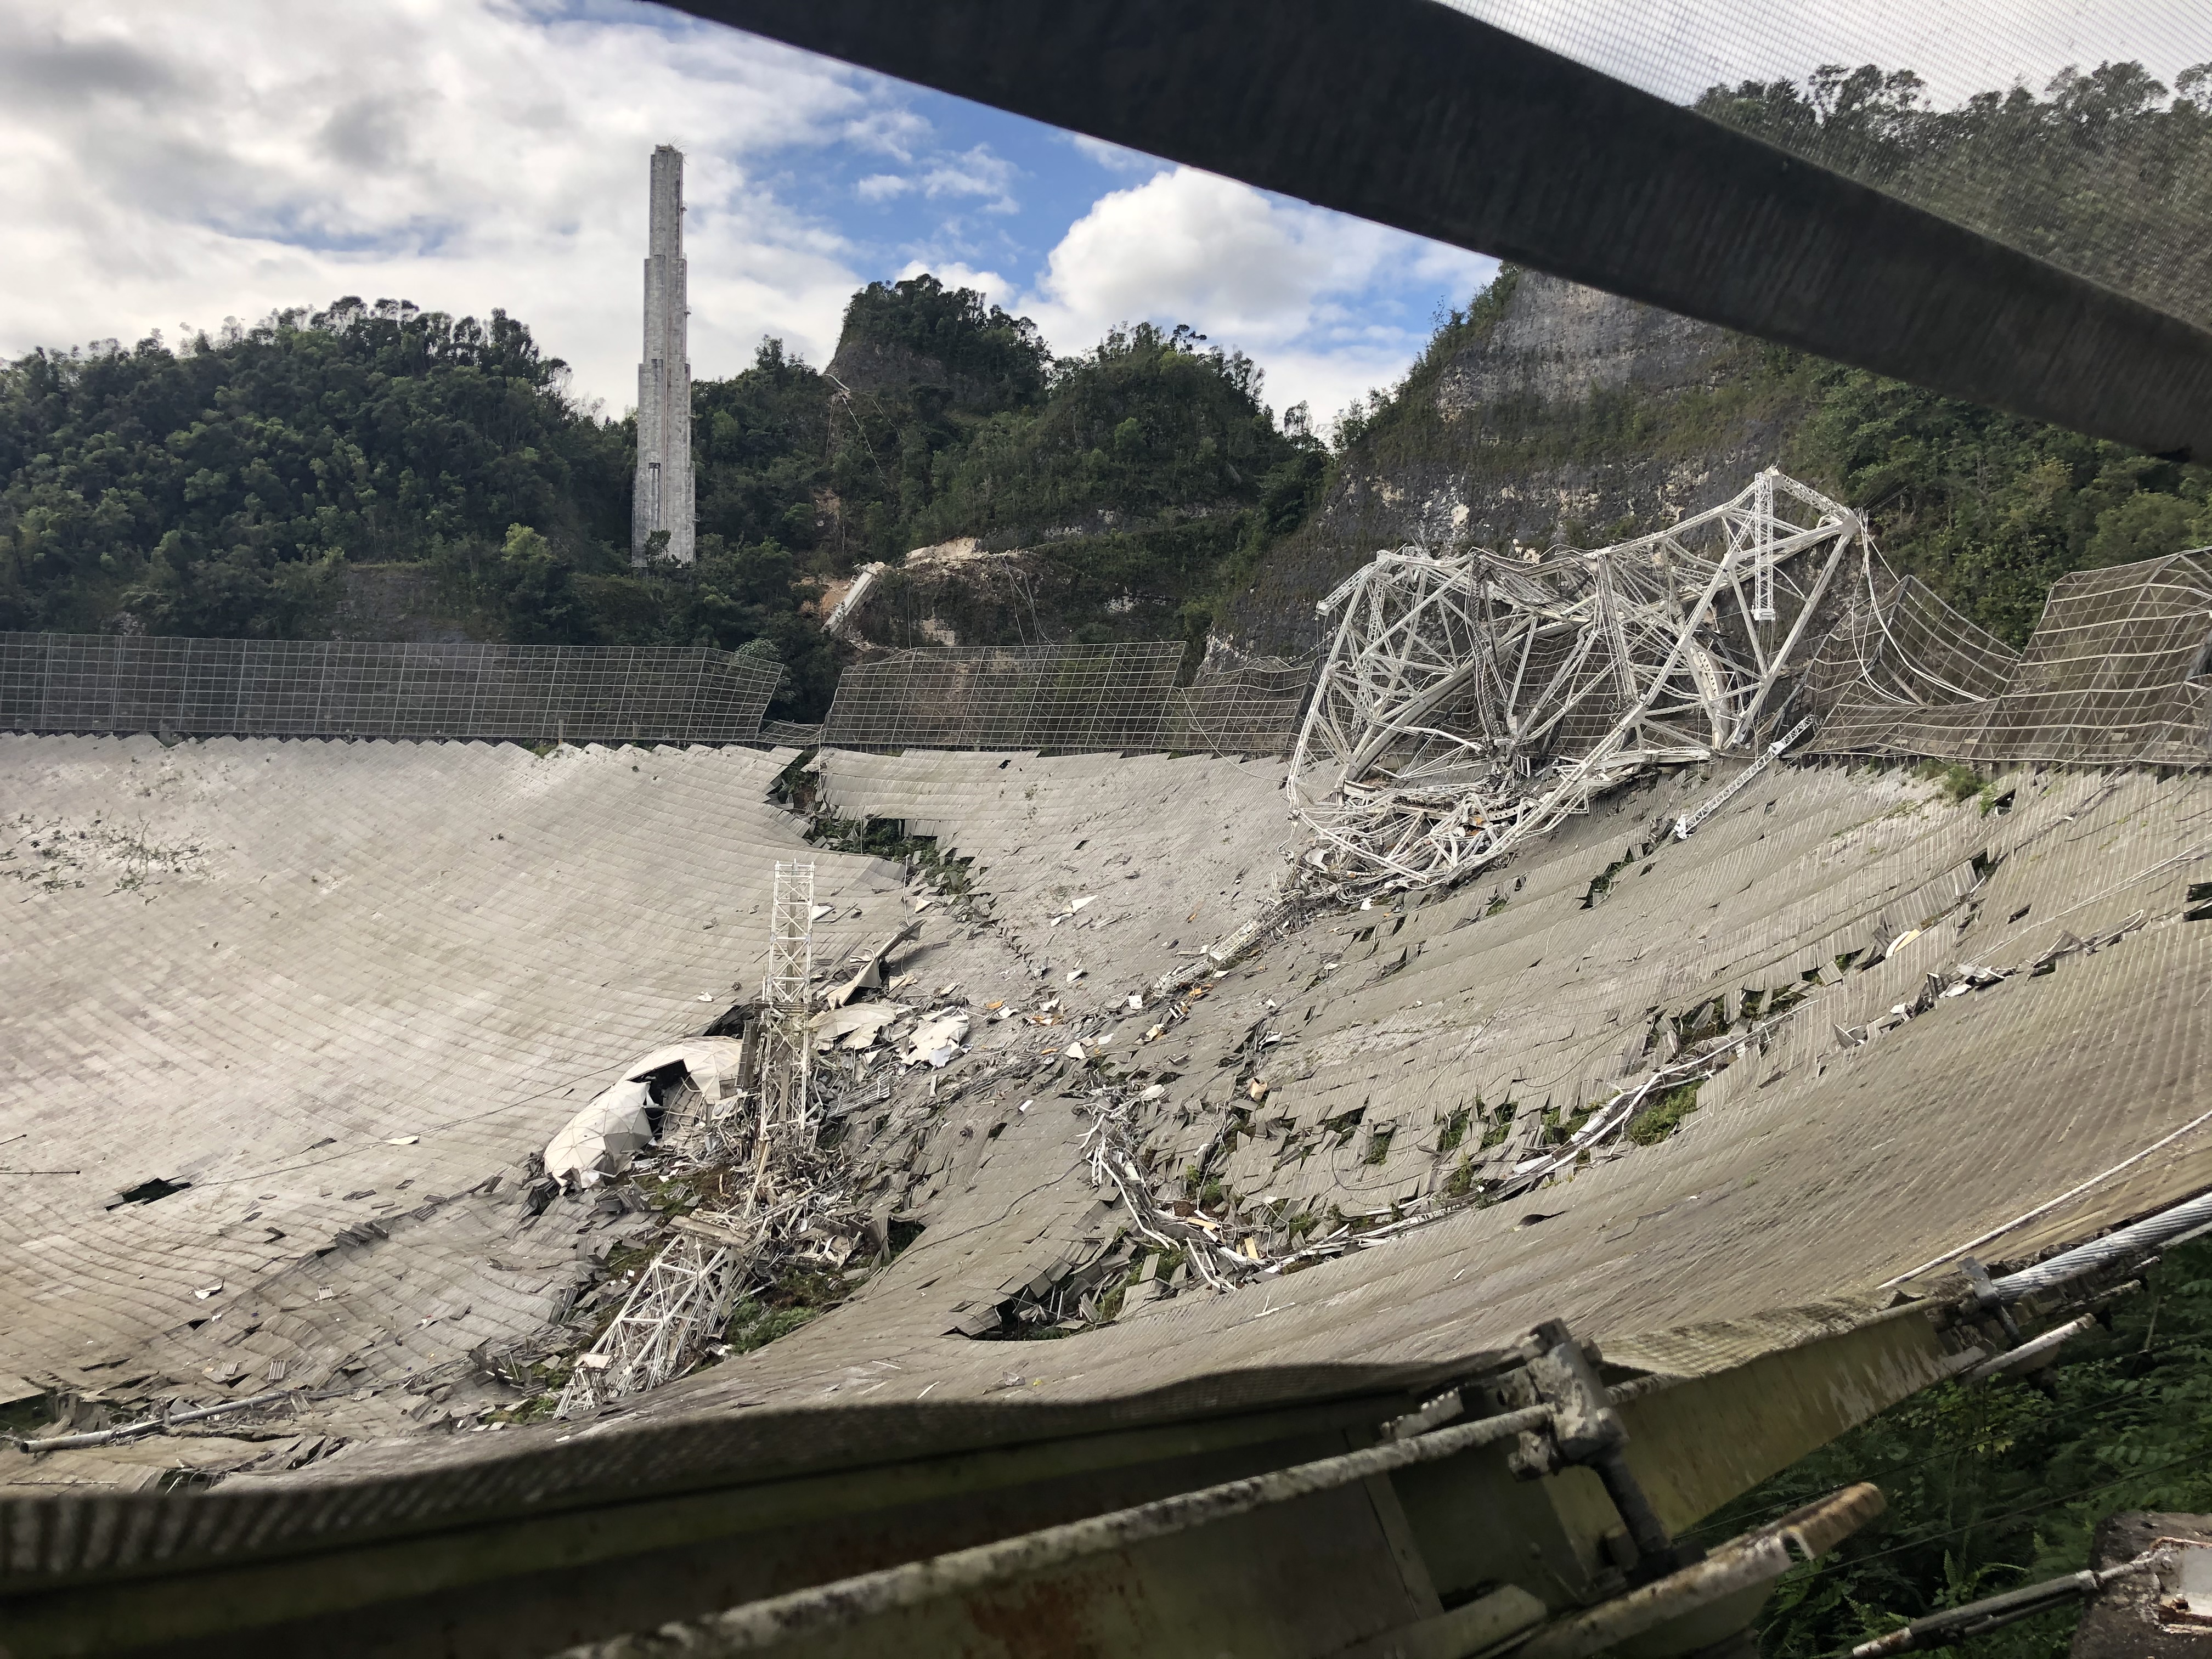 An image taken on Dec. 8, 2020, shows the wreckage of the radio telescope at Arecibo Observatory.